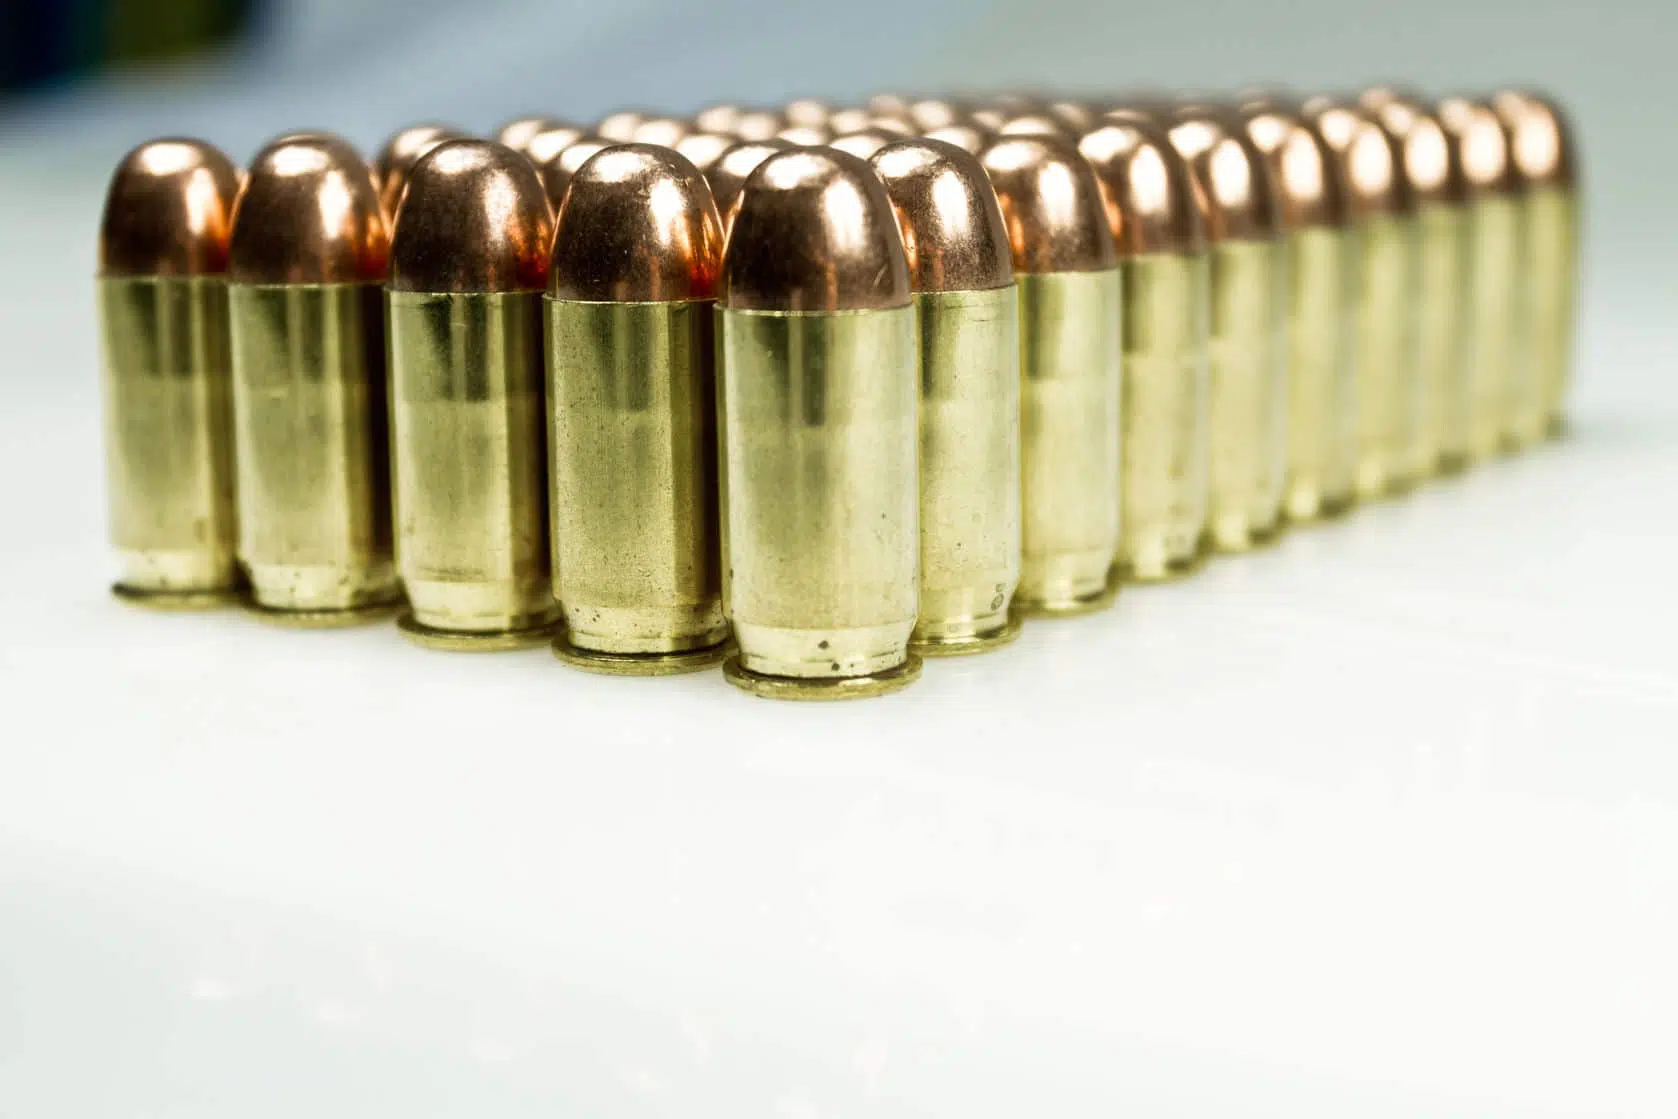 Image of a collection of bullets. Possession of high-capacity magazines may be permitted now that a federal judge has sided with the NRA on California's new gun laws.